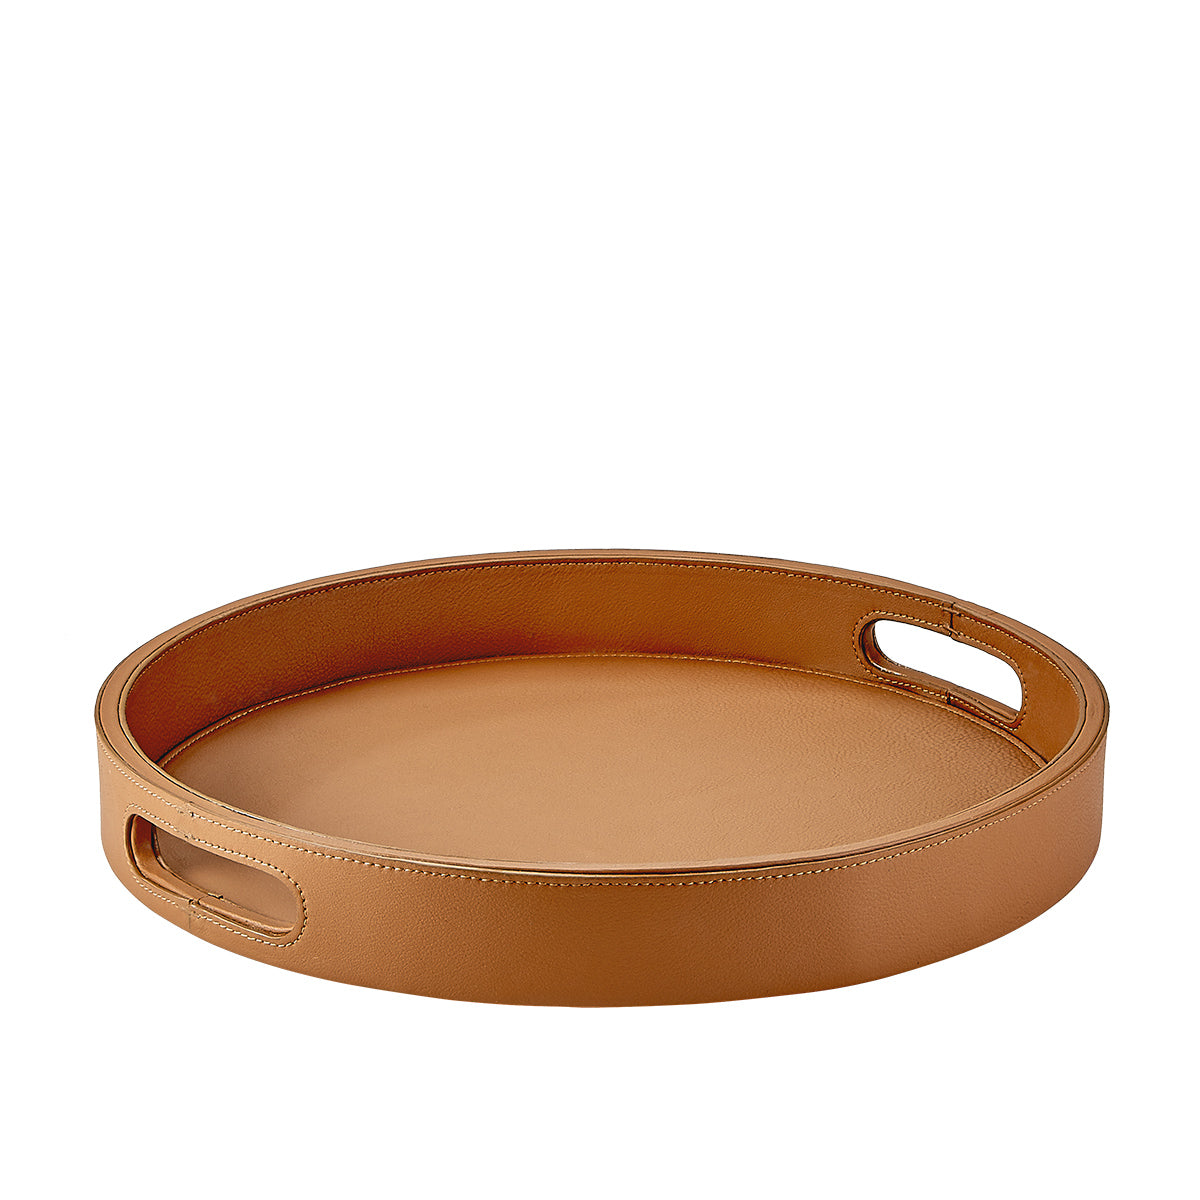 Graphic Image Round Leather Tray British Tan Traditional Leather